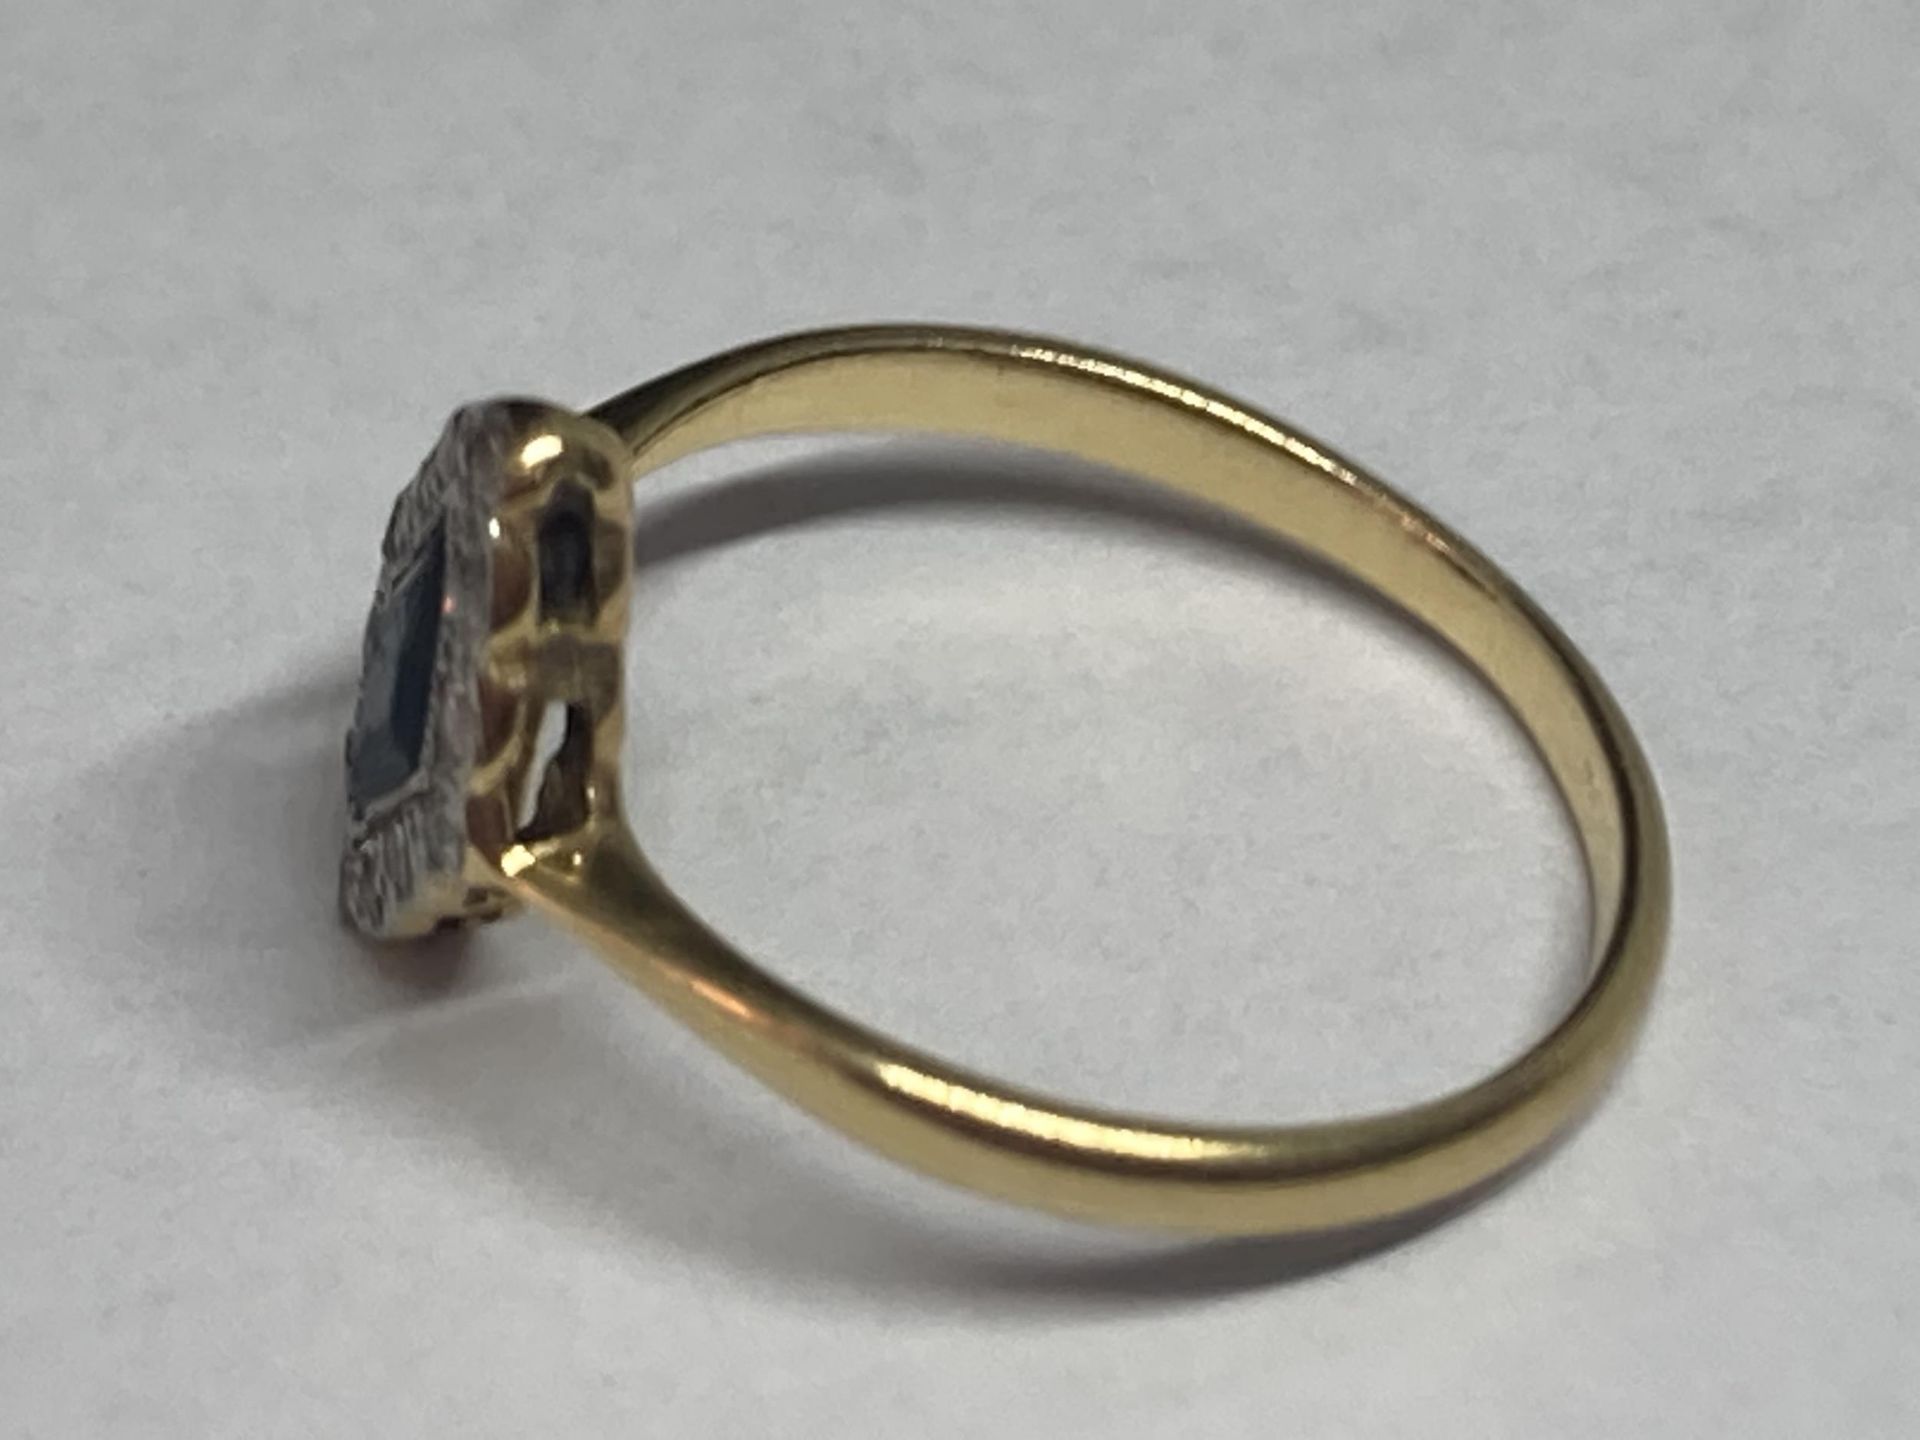 A 9 CARAT GOLD RING WITH A DIAMOND SHAPED SAPPHIRE SURROUNDED BY DIAMONDS SIZE J/K - Image 2 of 3